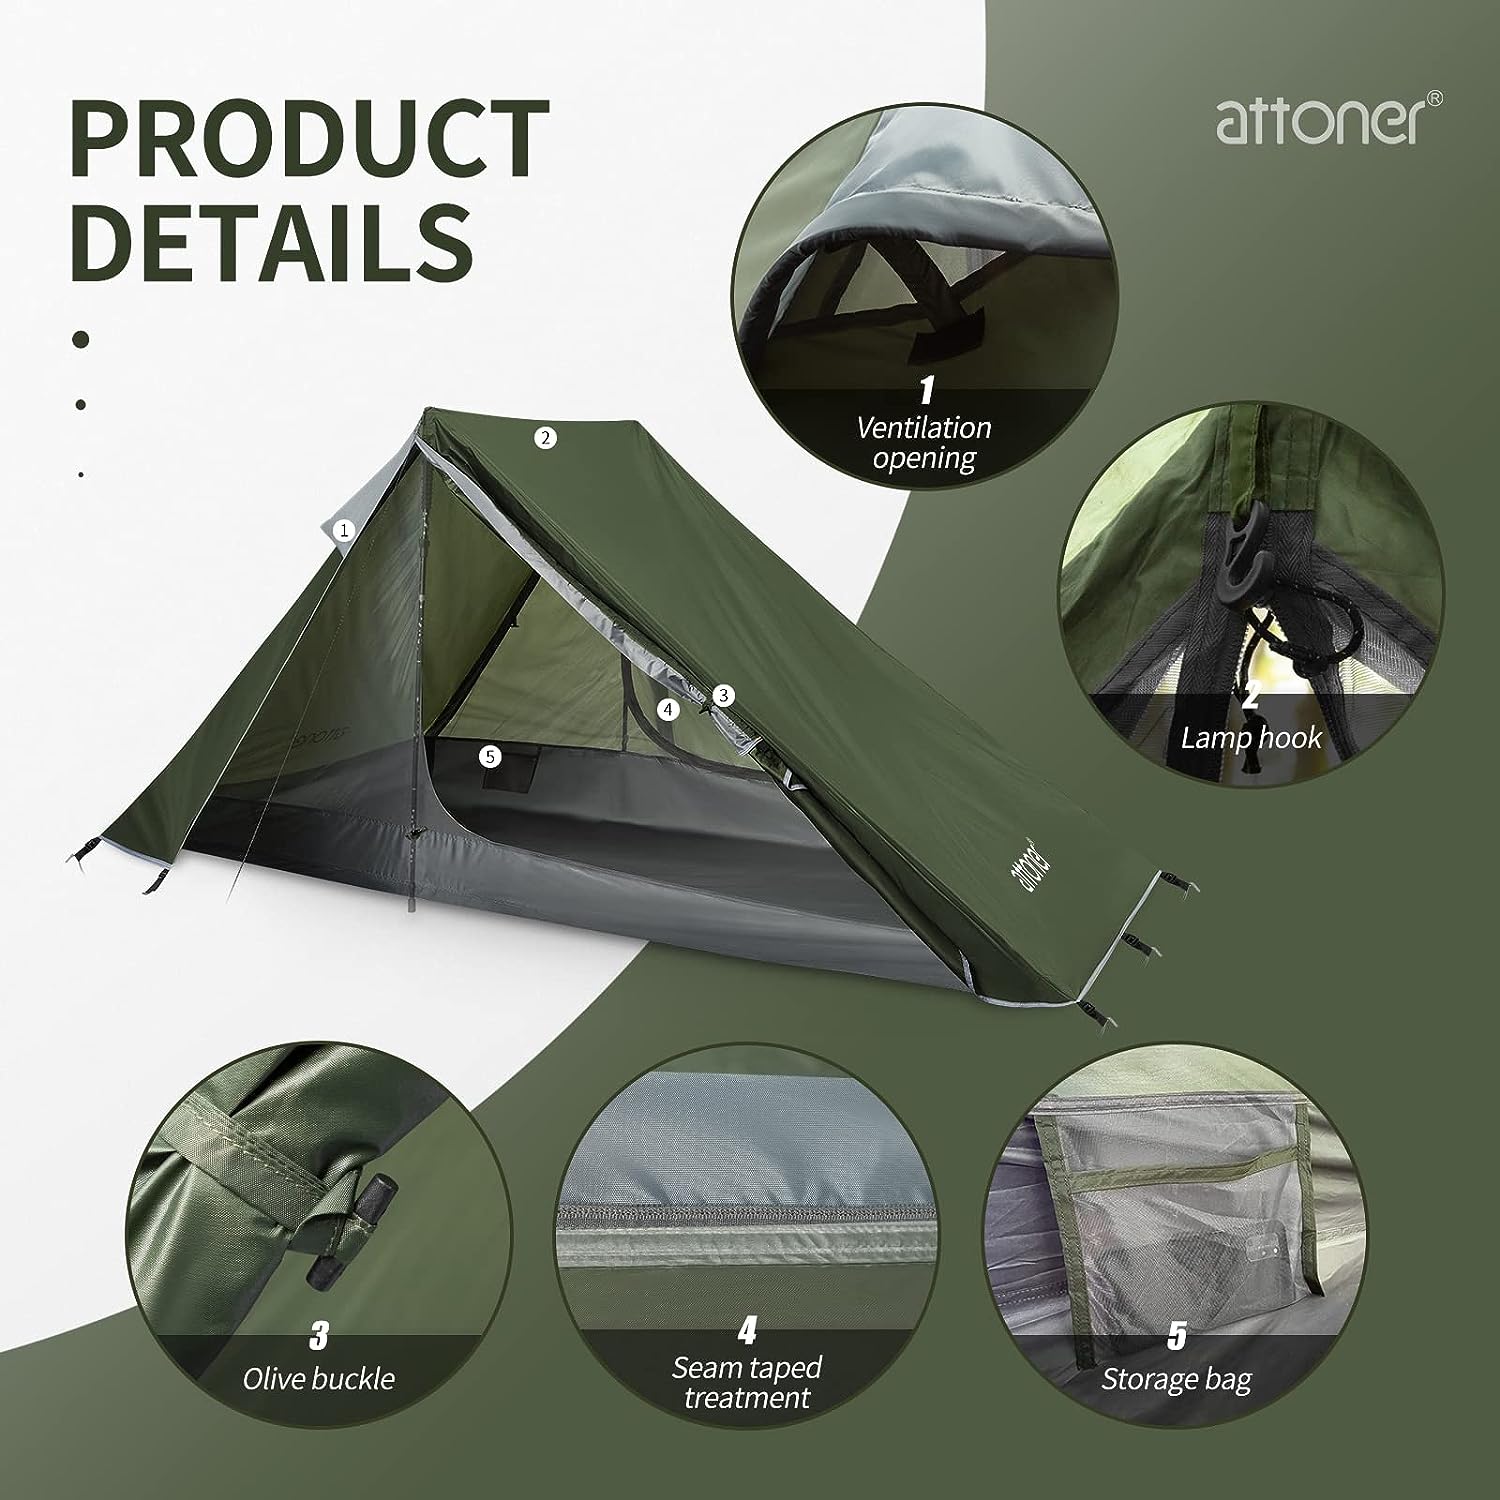 attoner ridge tent green polyester waterproof backpacking tent details